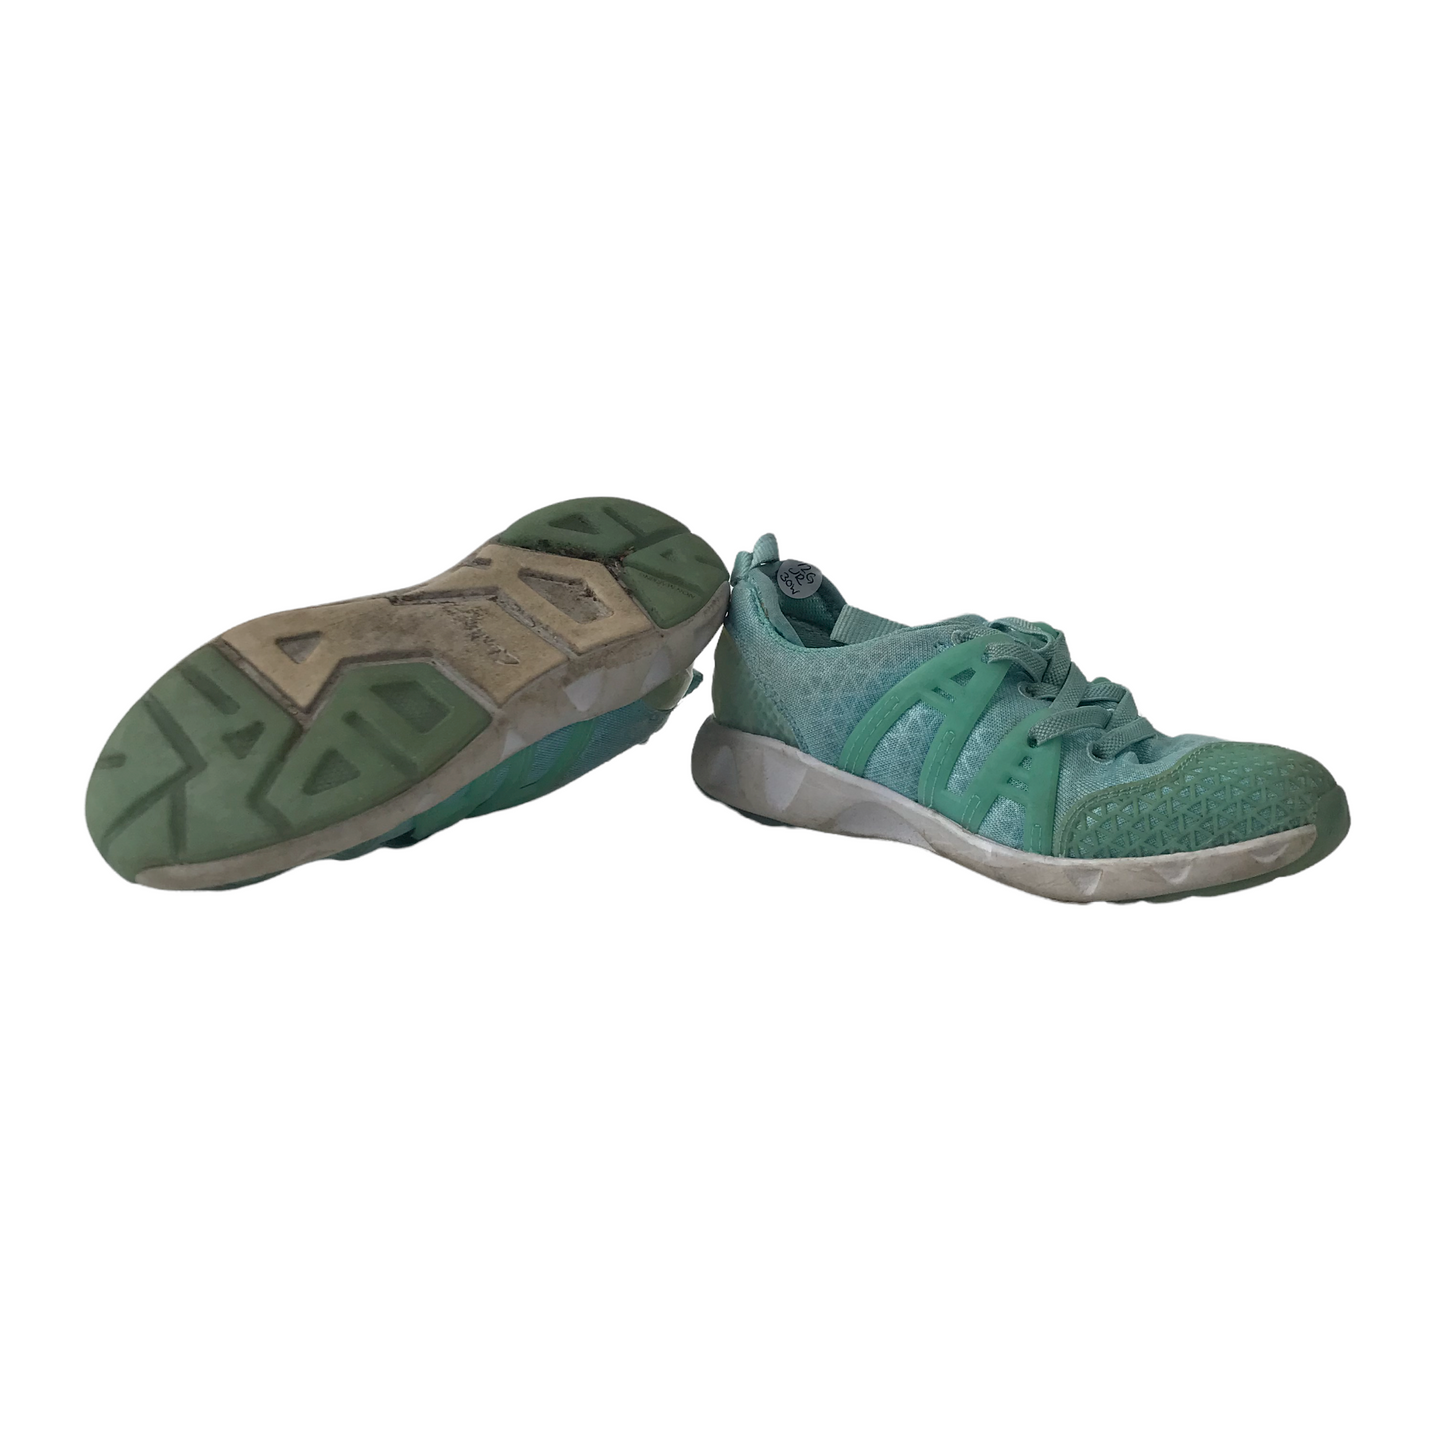 Clarks Turquoise Trainers Shoe Size 12G (jr)